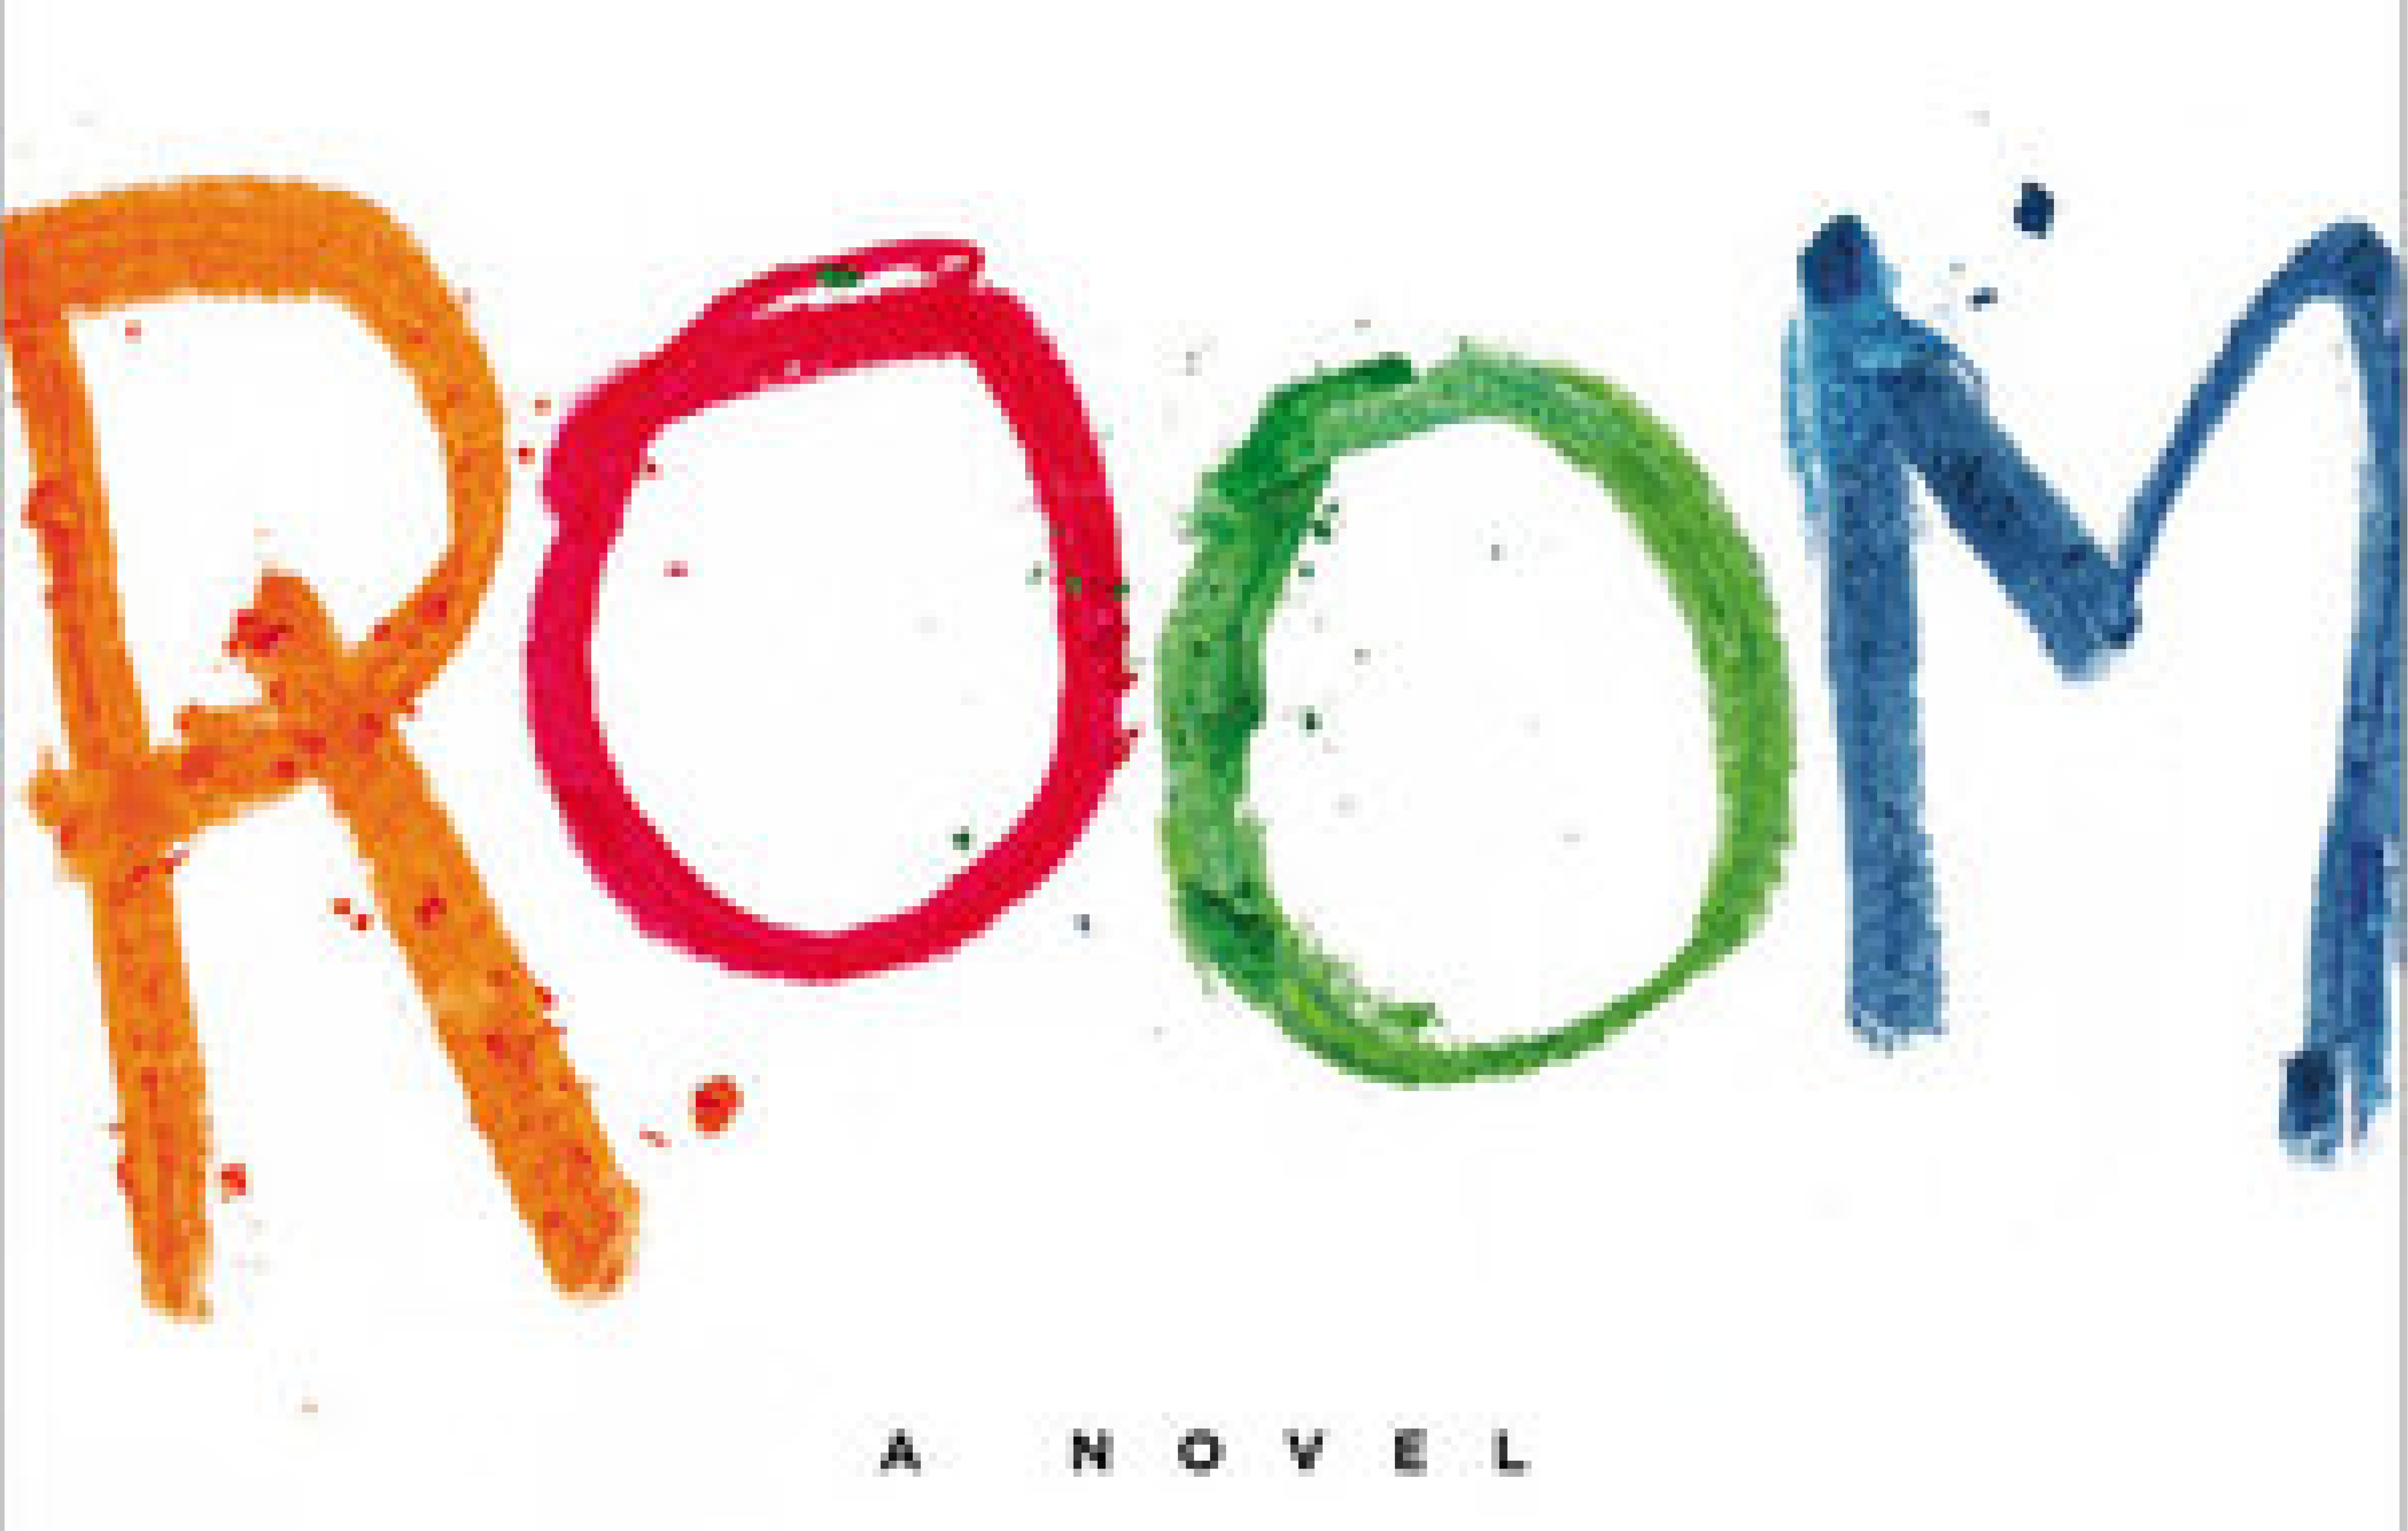 room by emma donpghue review